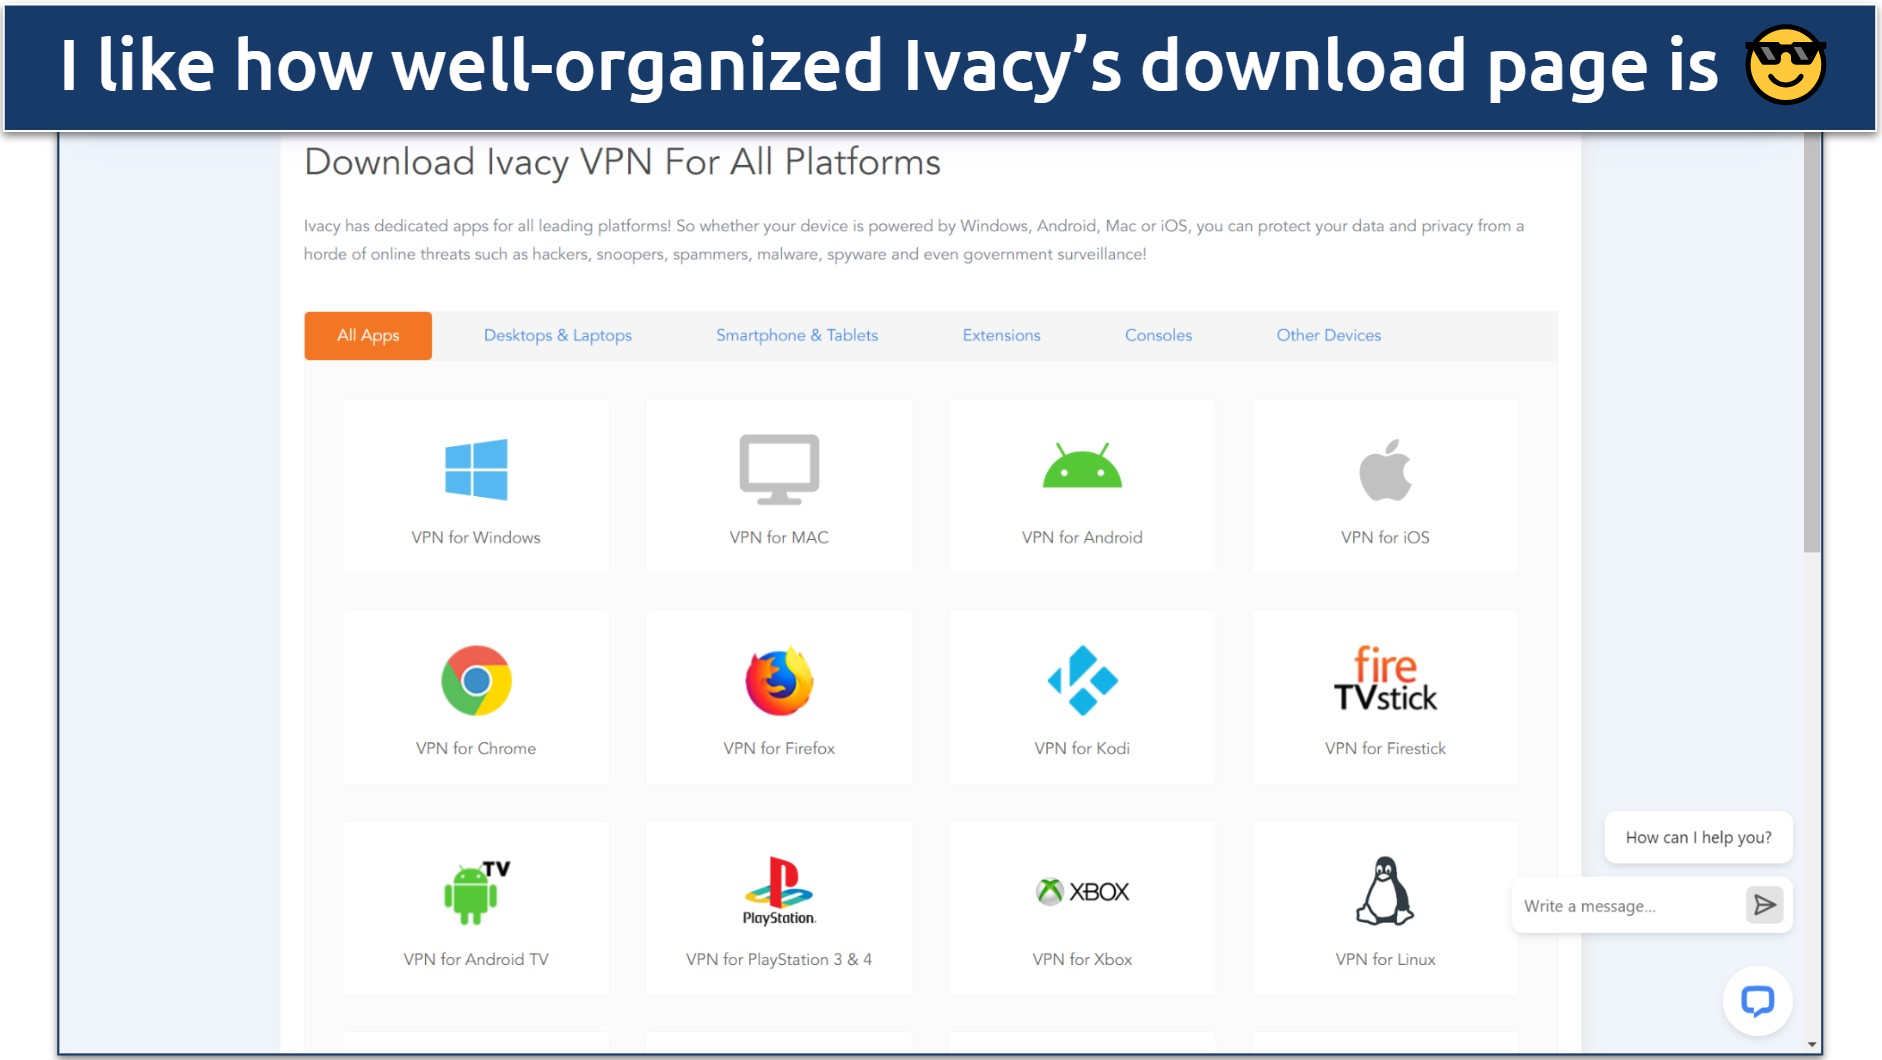 Screenshot of Ivacy's download page from its website